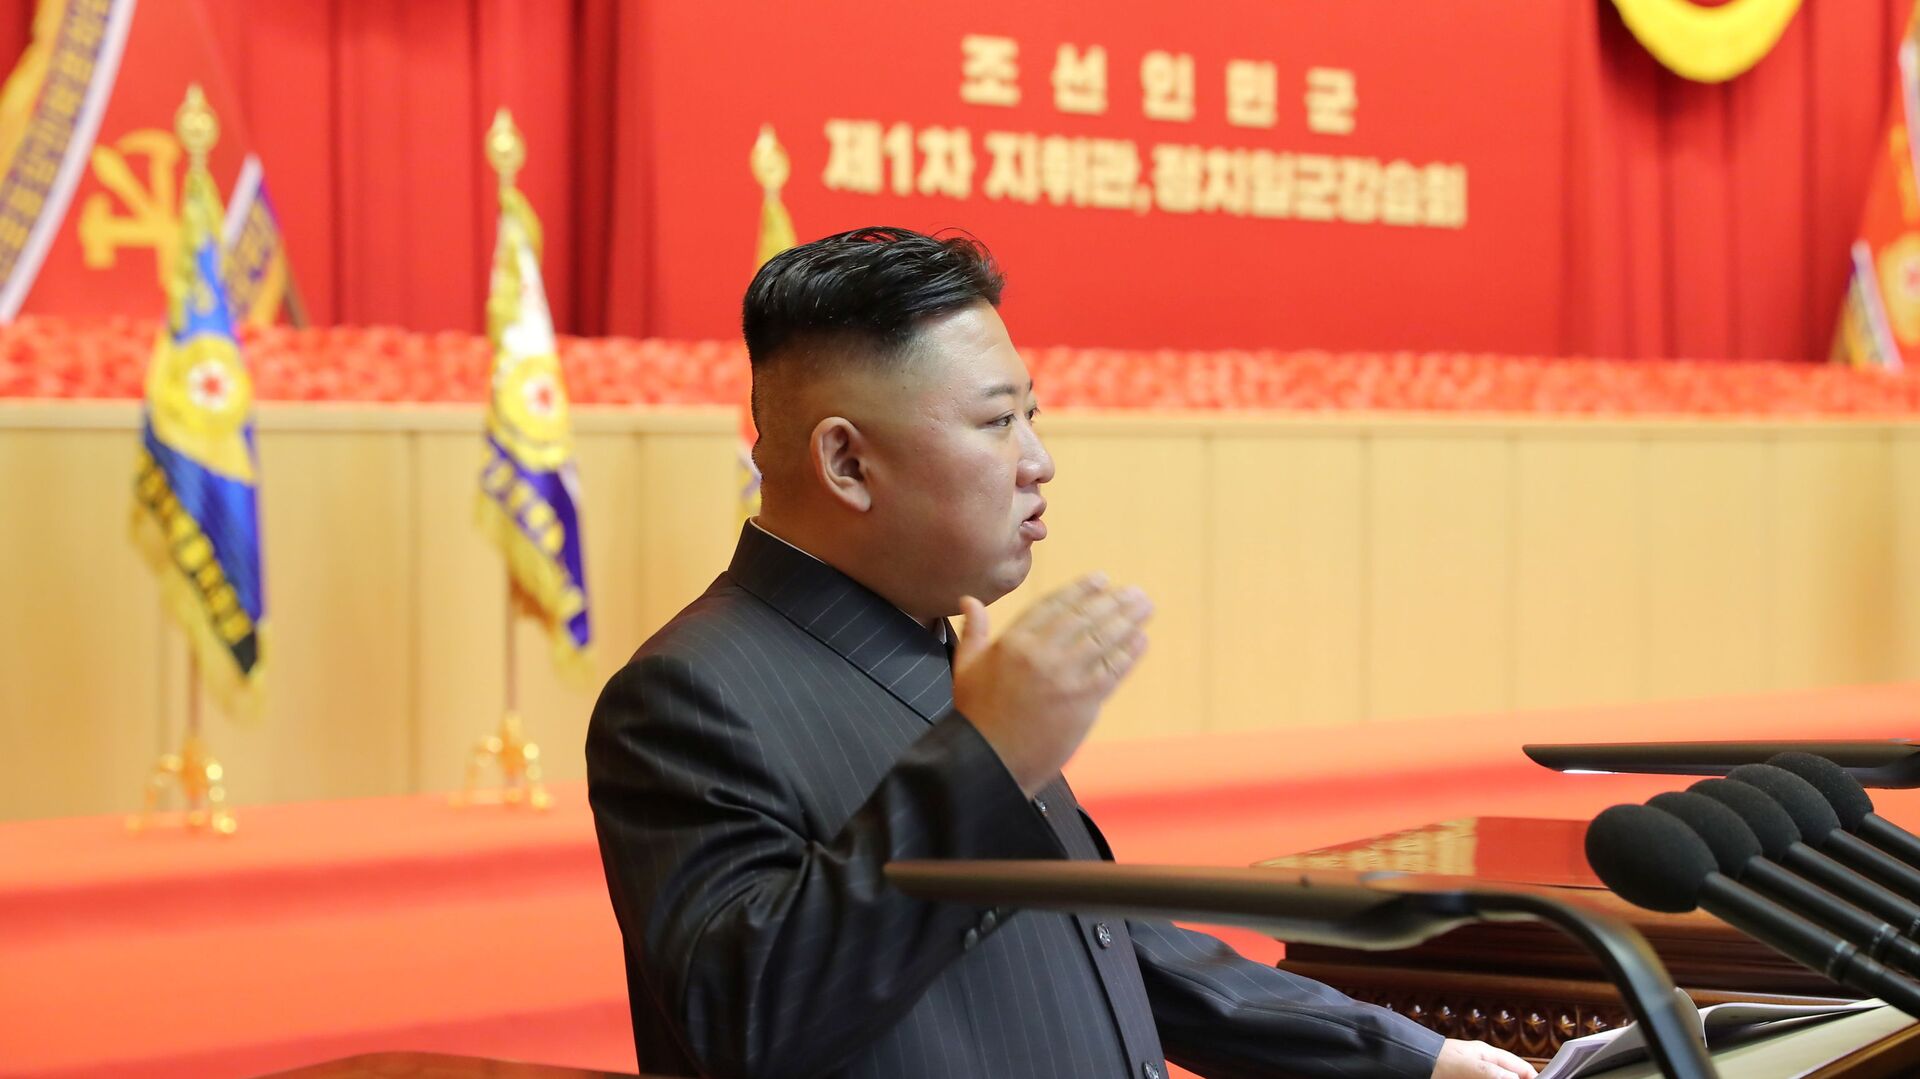 North Korea's leader Kim Jong Un leads the first workshop of the commanders and political officers of the Korean People's Army (KPA) in Pyongyang, North Korea in this image supplied by North Korea's Korean Central News Agency on July 30, 2021. - Sputnik International, 1920, 09.09.2021